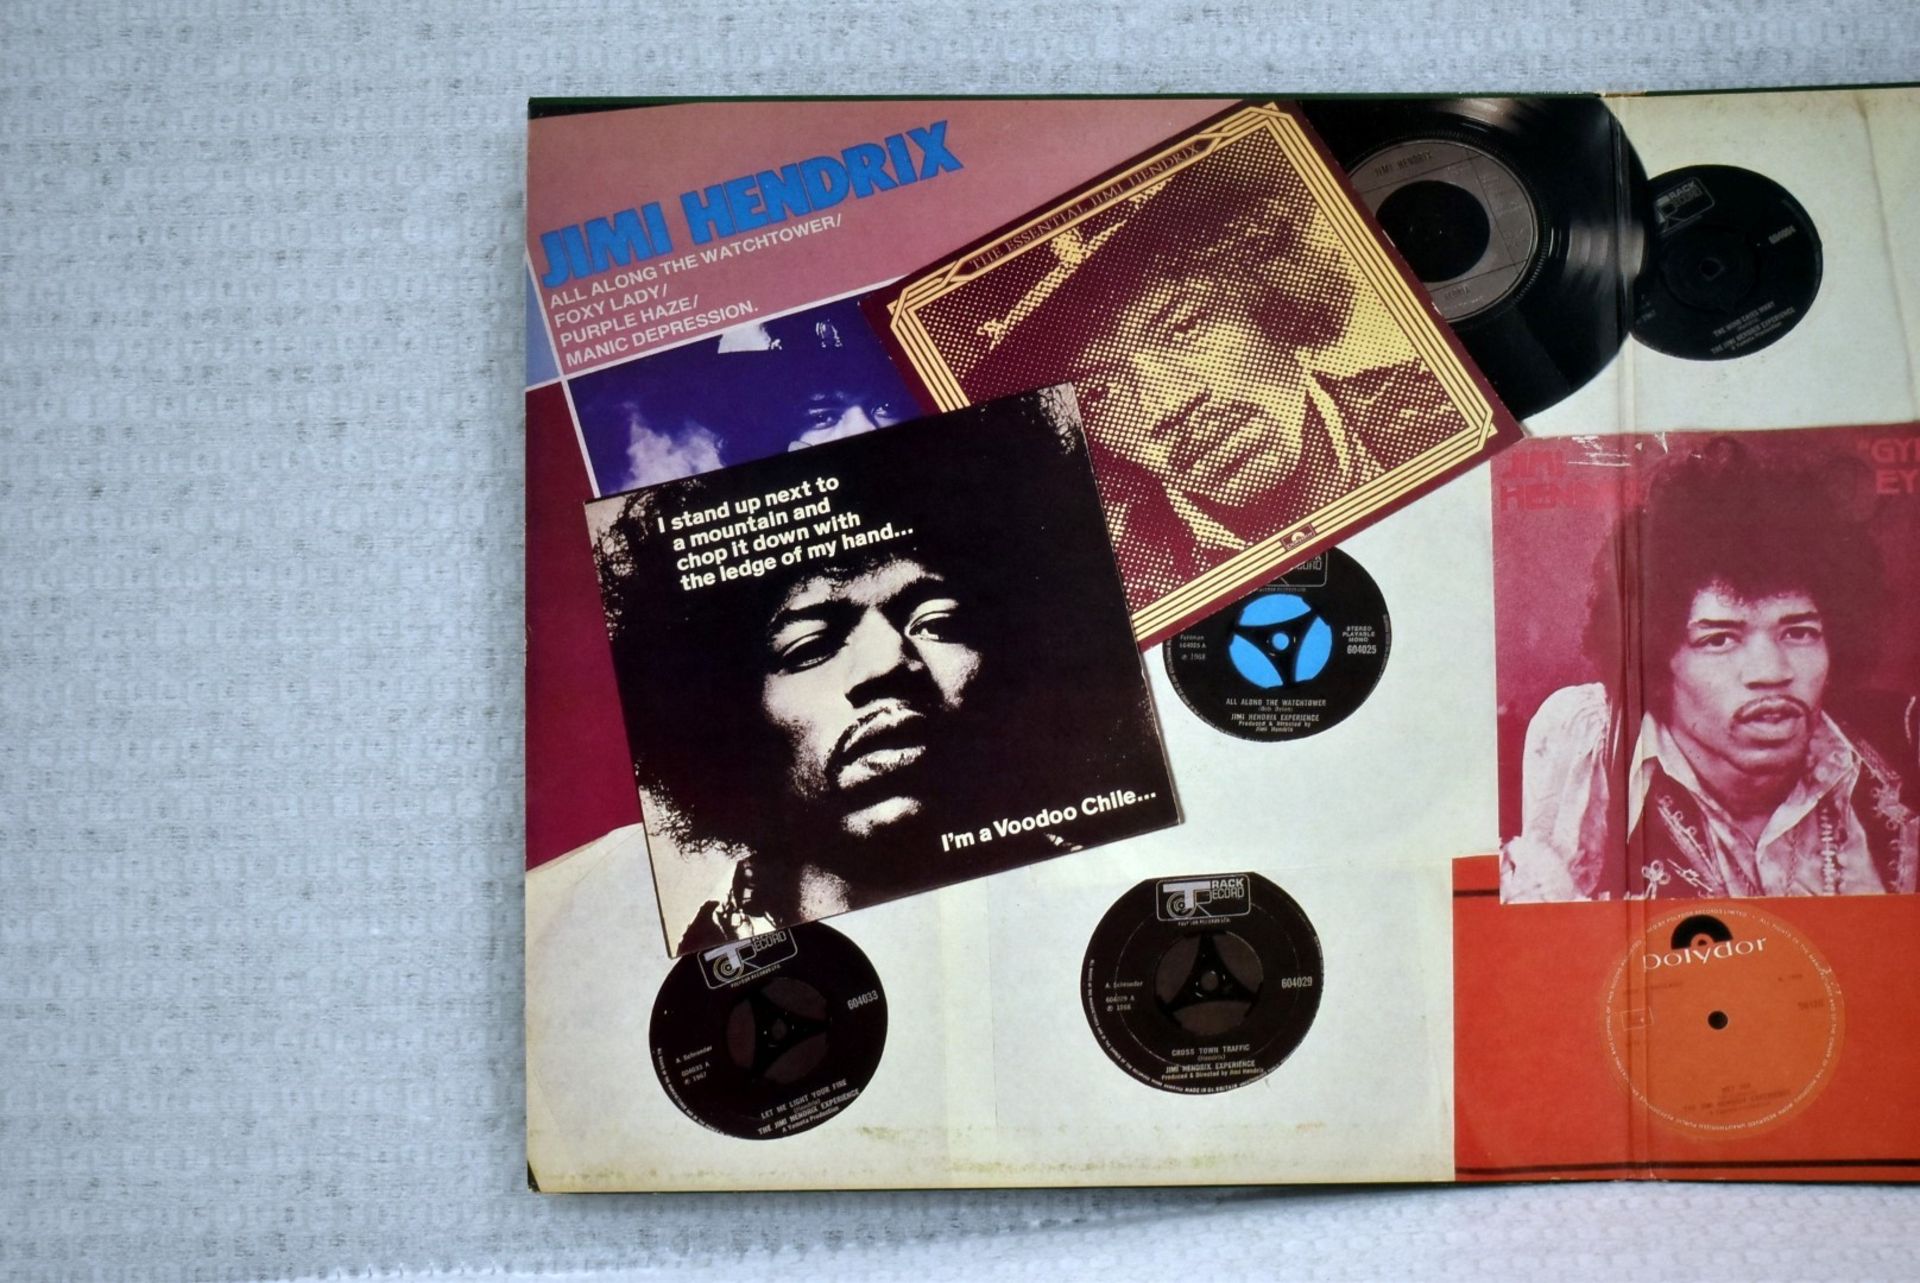 1 x JIMI HENDRIX The Singles Album Polydor Records Limited 1983 2 Double Sided 12 Inch Vinyls - - Image 10 of 22